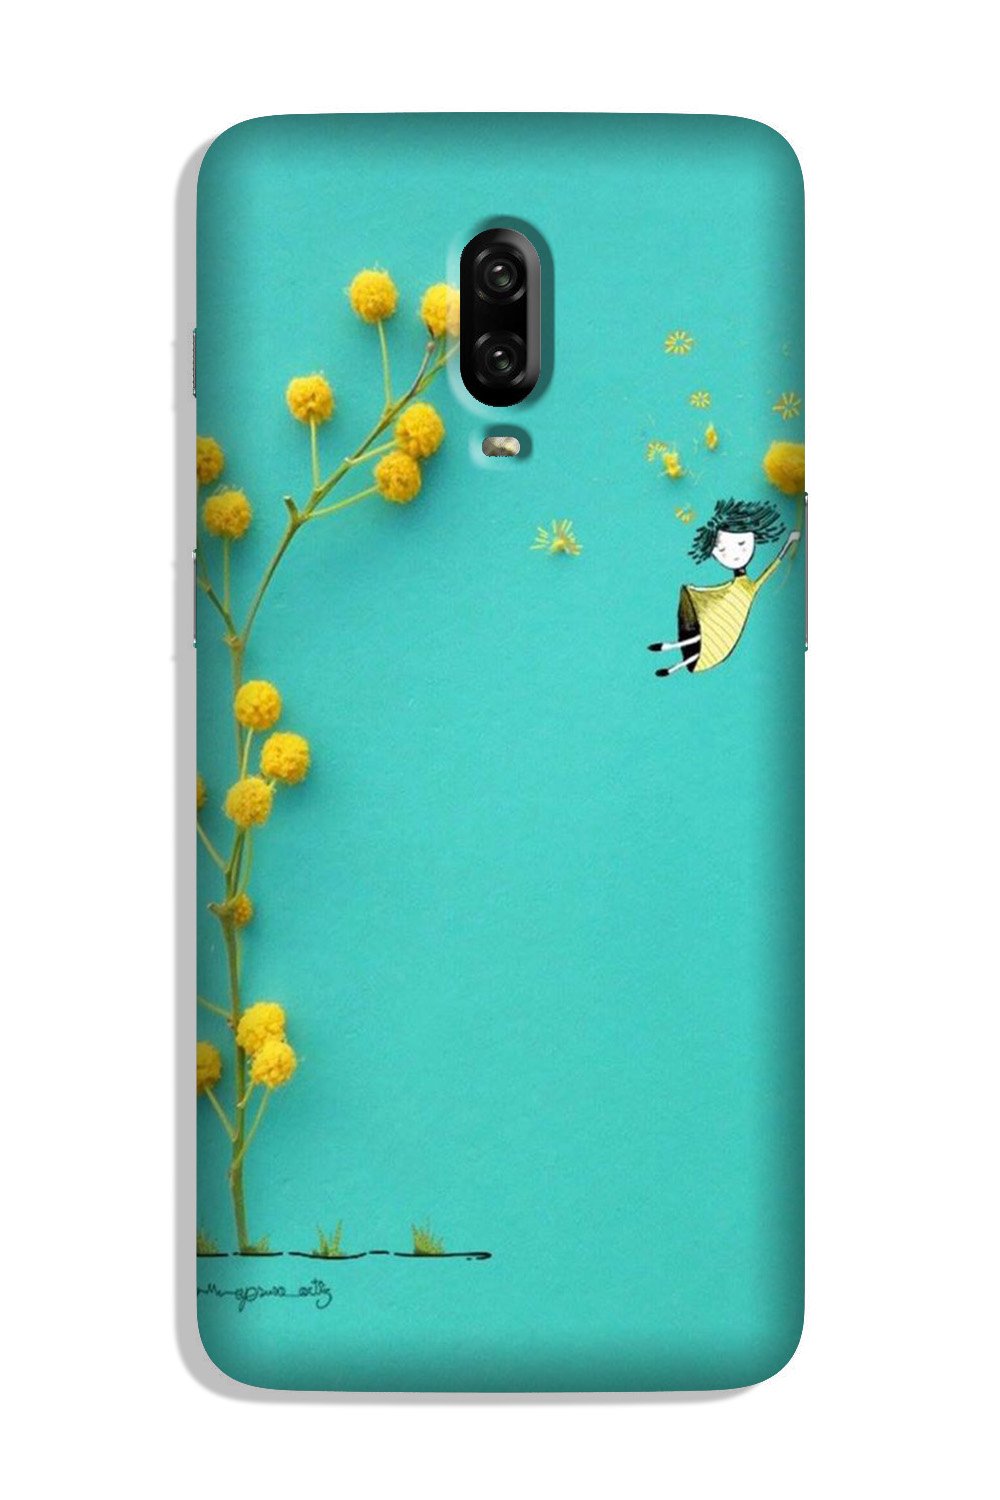 Flowers Girl Case for OnePlus 7 (Design No. 216)